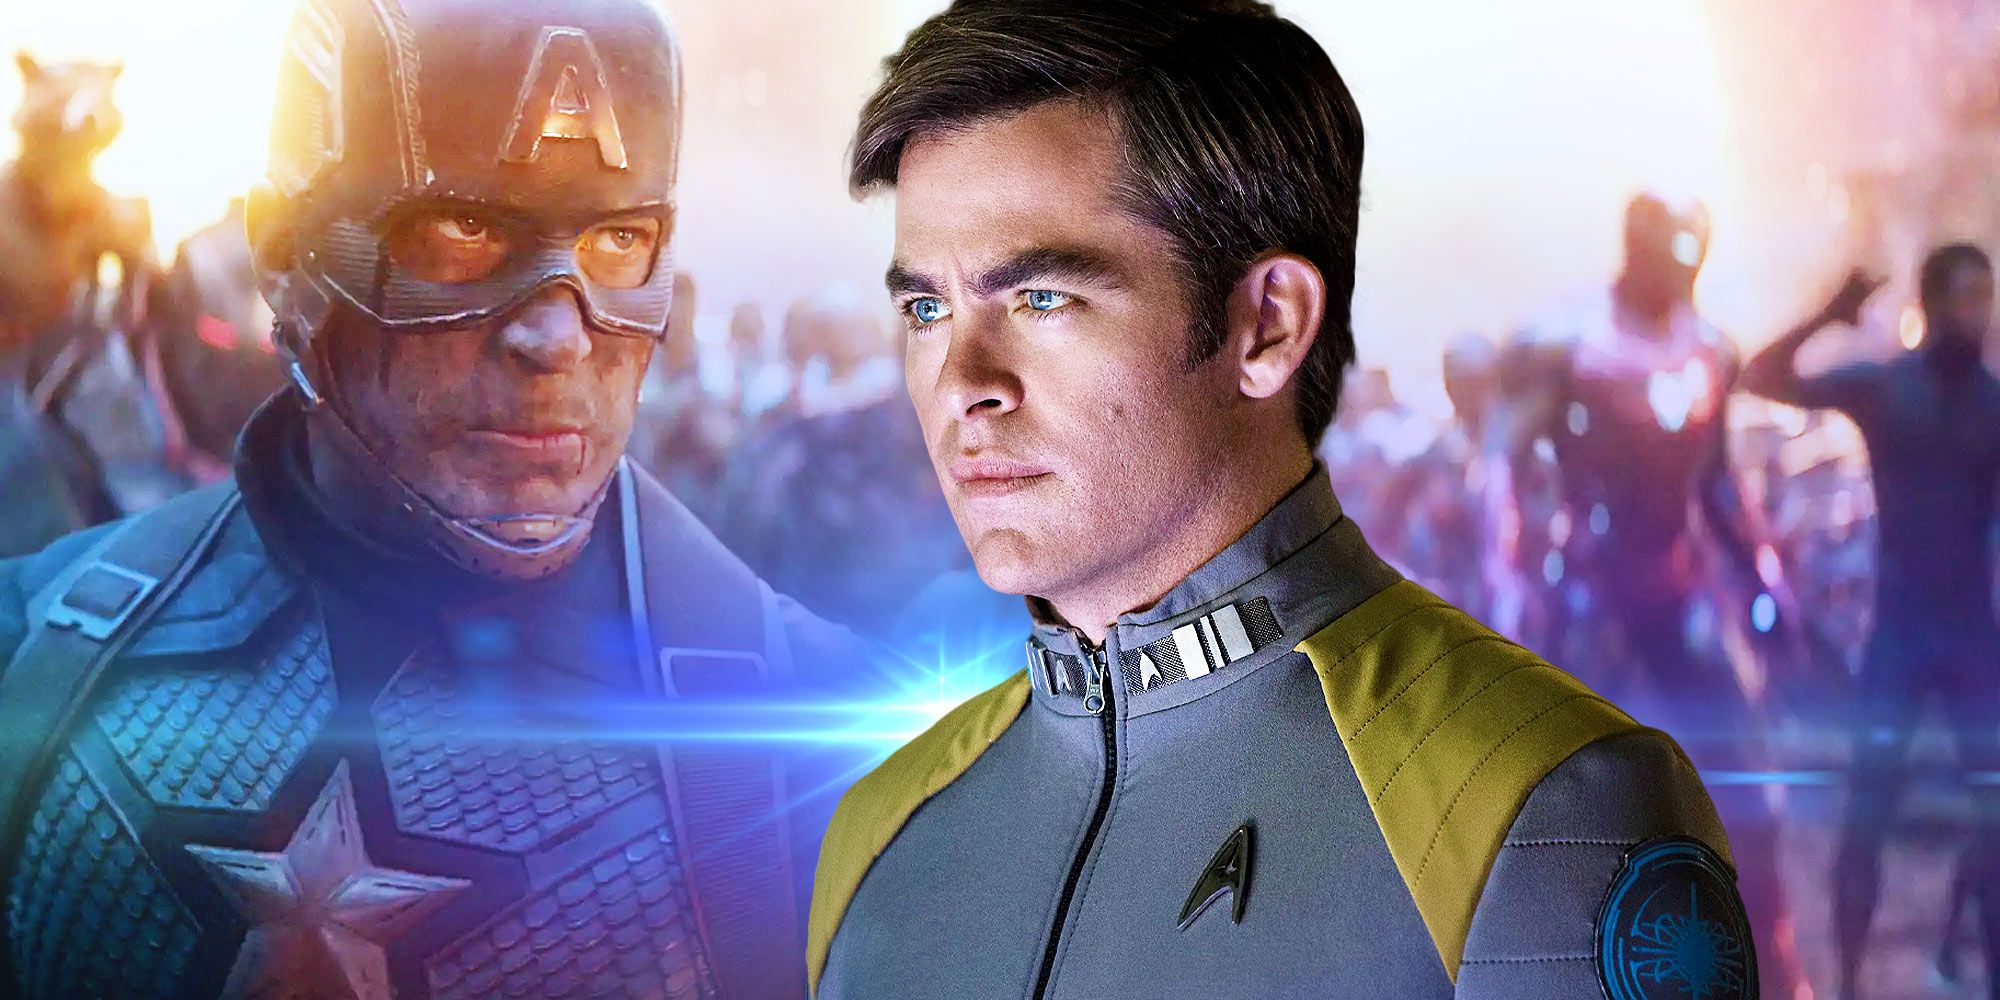 Chris Pine thinks the Star Trek movies shouldn't compete with Marvel